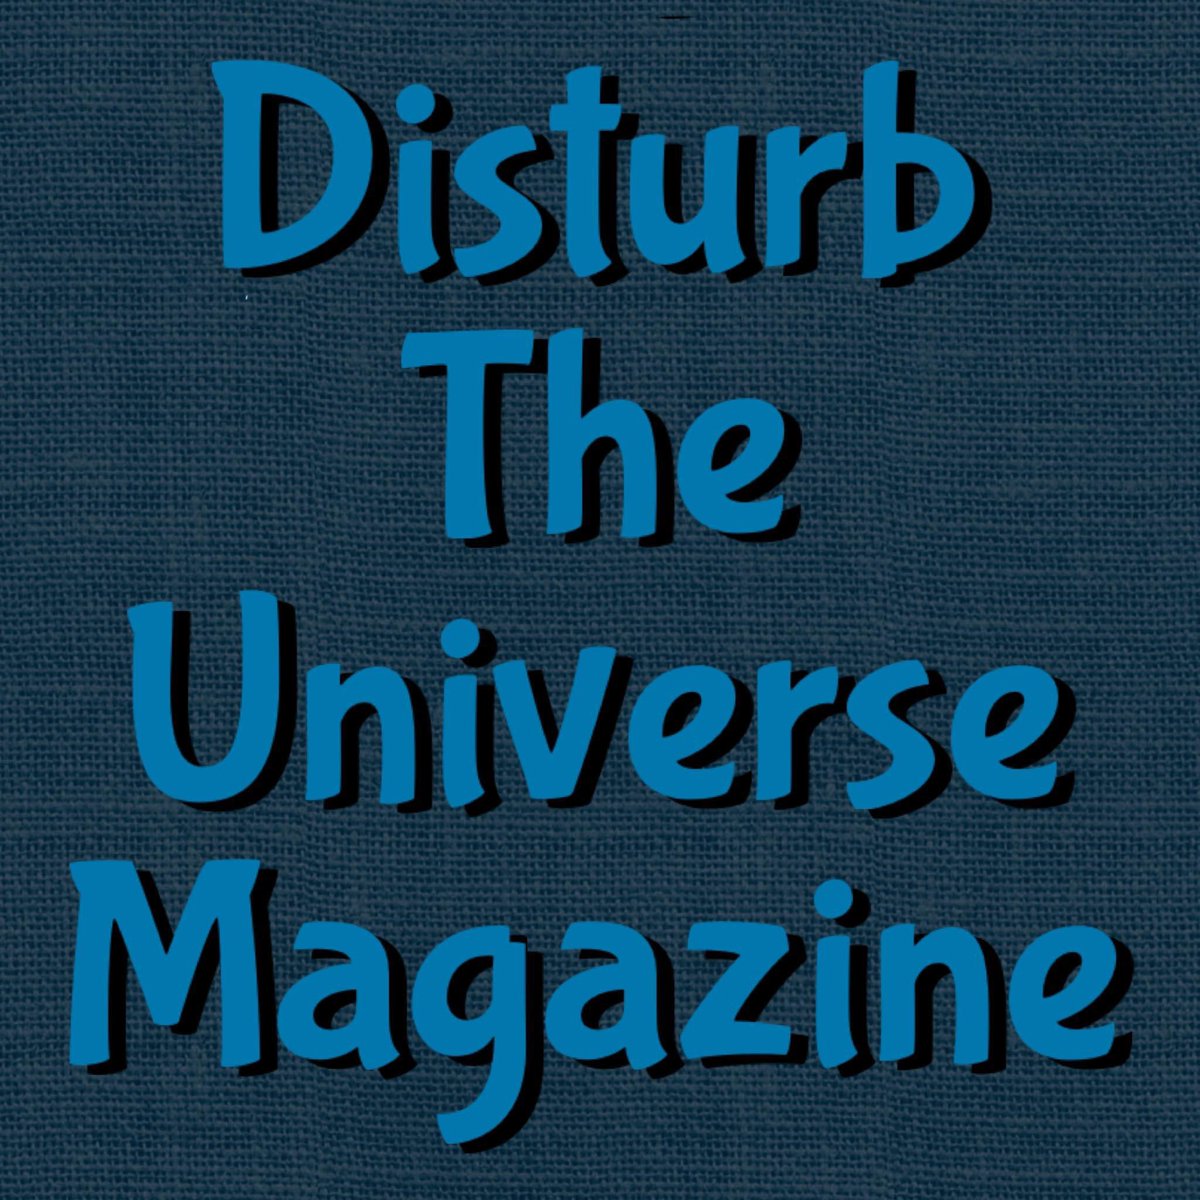 Up today at Disturb The Universe Magazine 

On A Slow Gloaming by Kushal Poddar

disturbtheuniversemagazine.com/2024/04/on-slo…

#publishedwriting #disturbtheuniversemagazine #published #writingcommunity #poetry #writing #publishedpoetry #poetrylovers #poetrytwitter #poetrycommunity